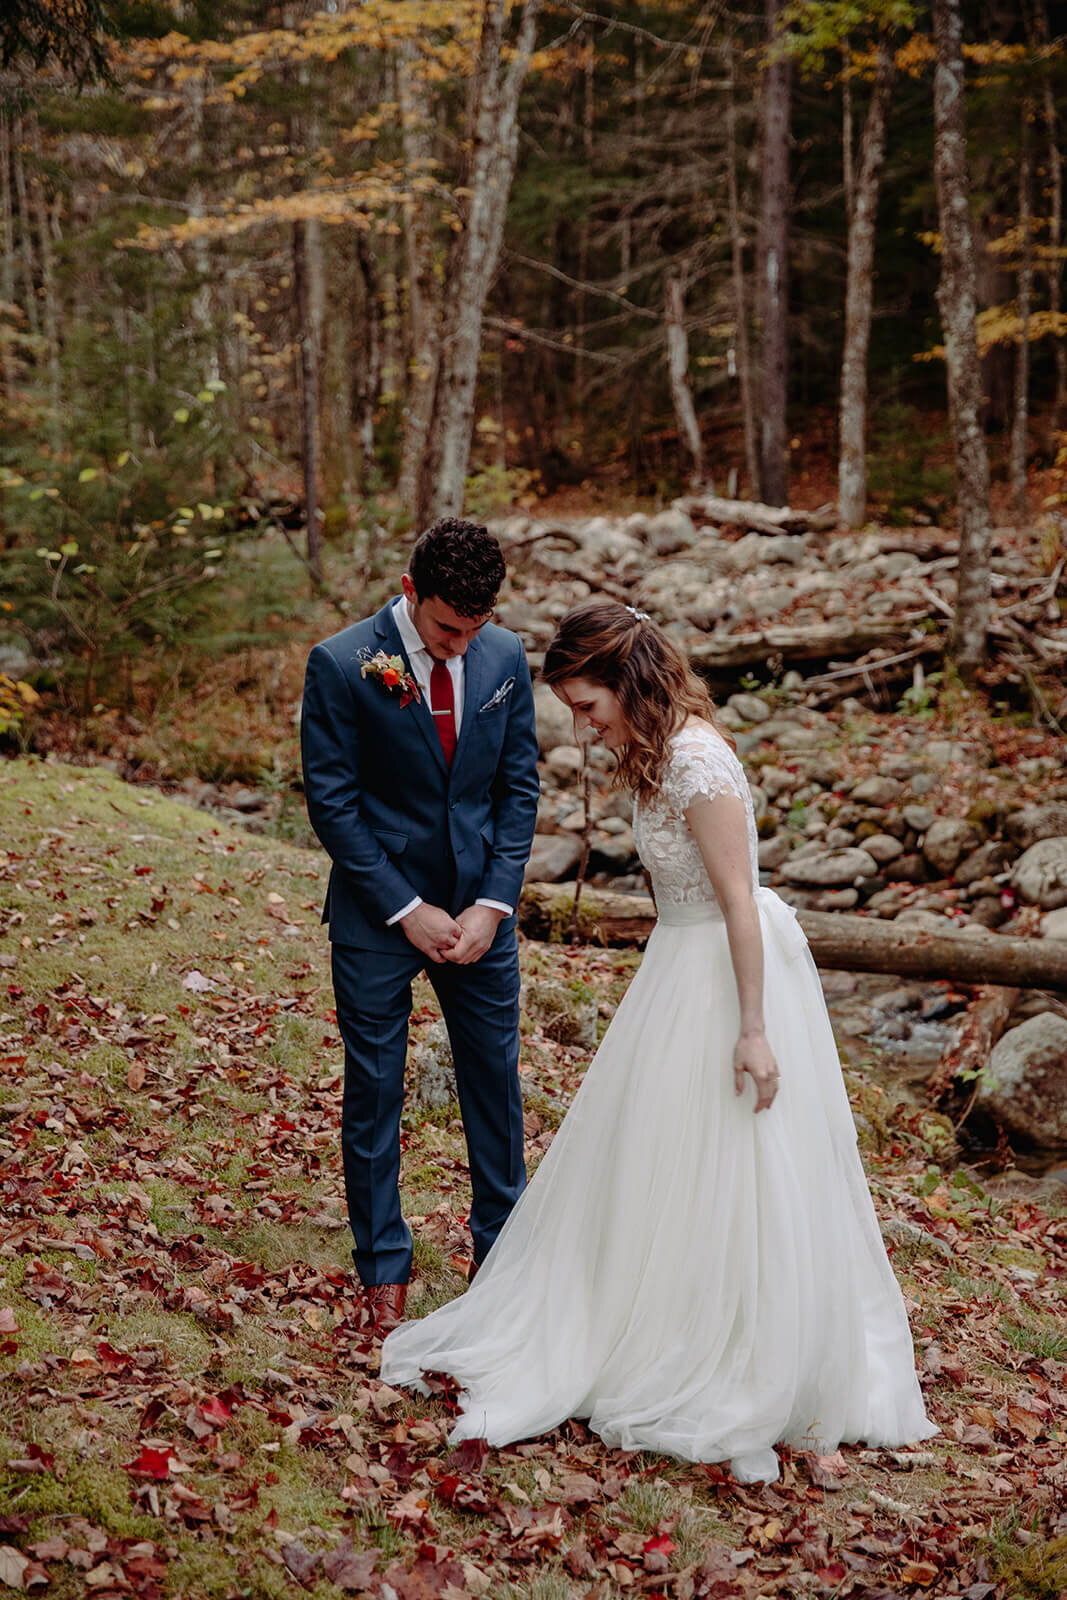  Couple sees each other for the first time during their elopement. Small outdoor wedding in the White Mountains, New Hampshire.  